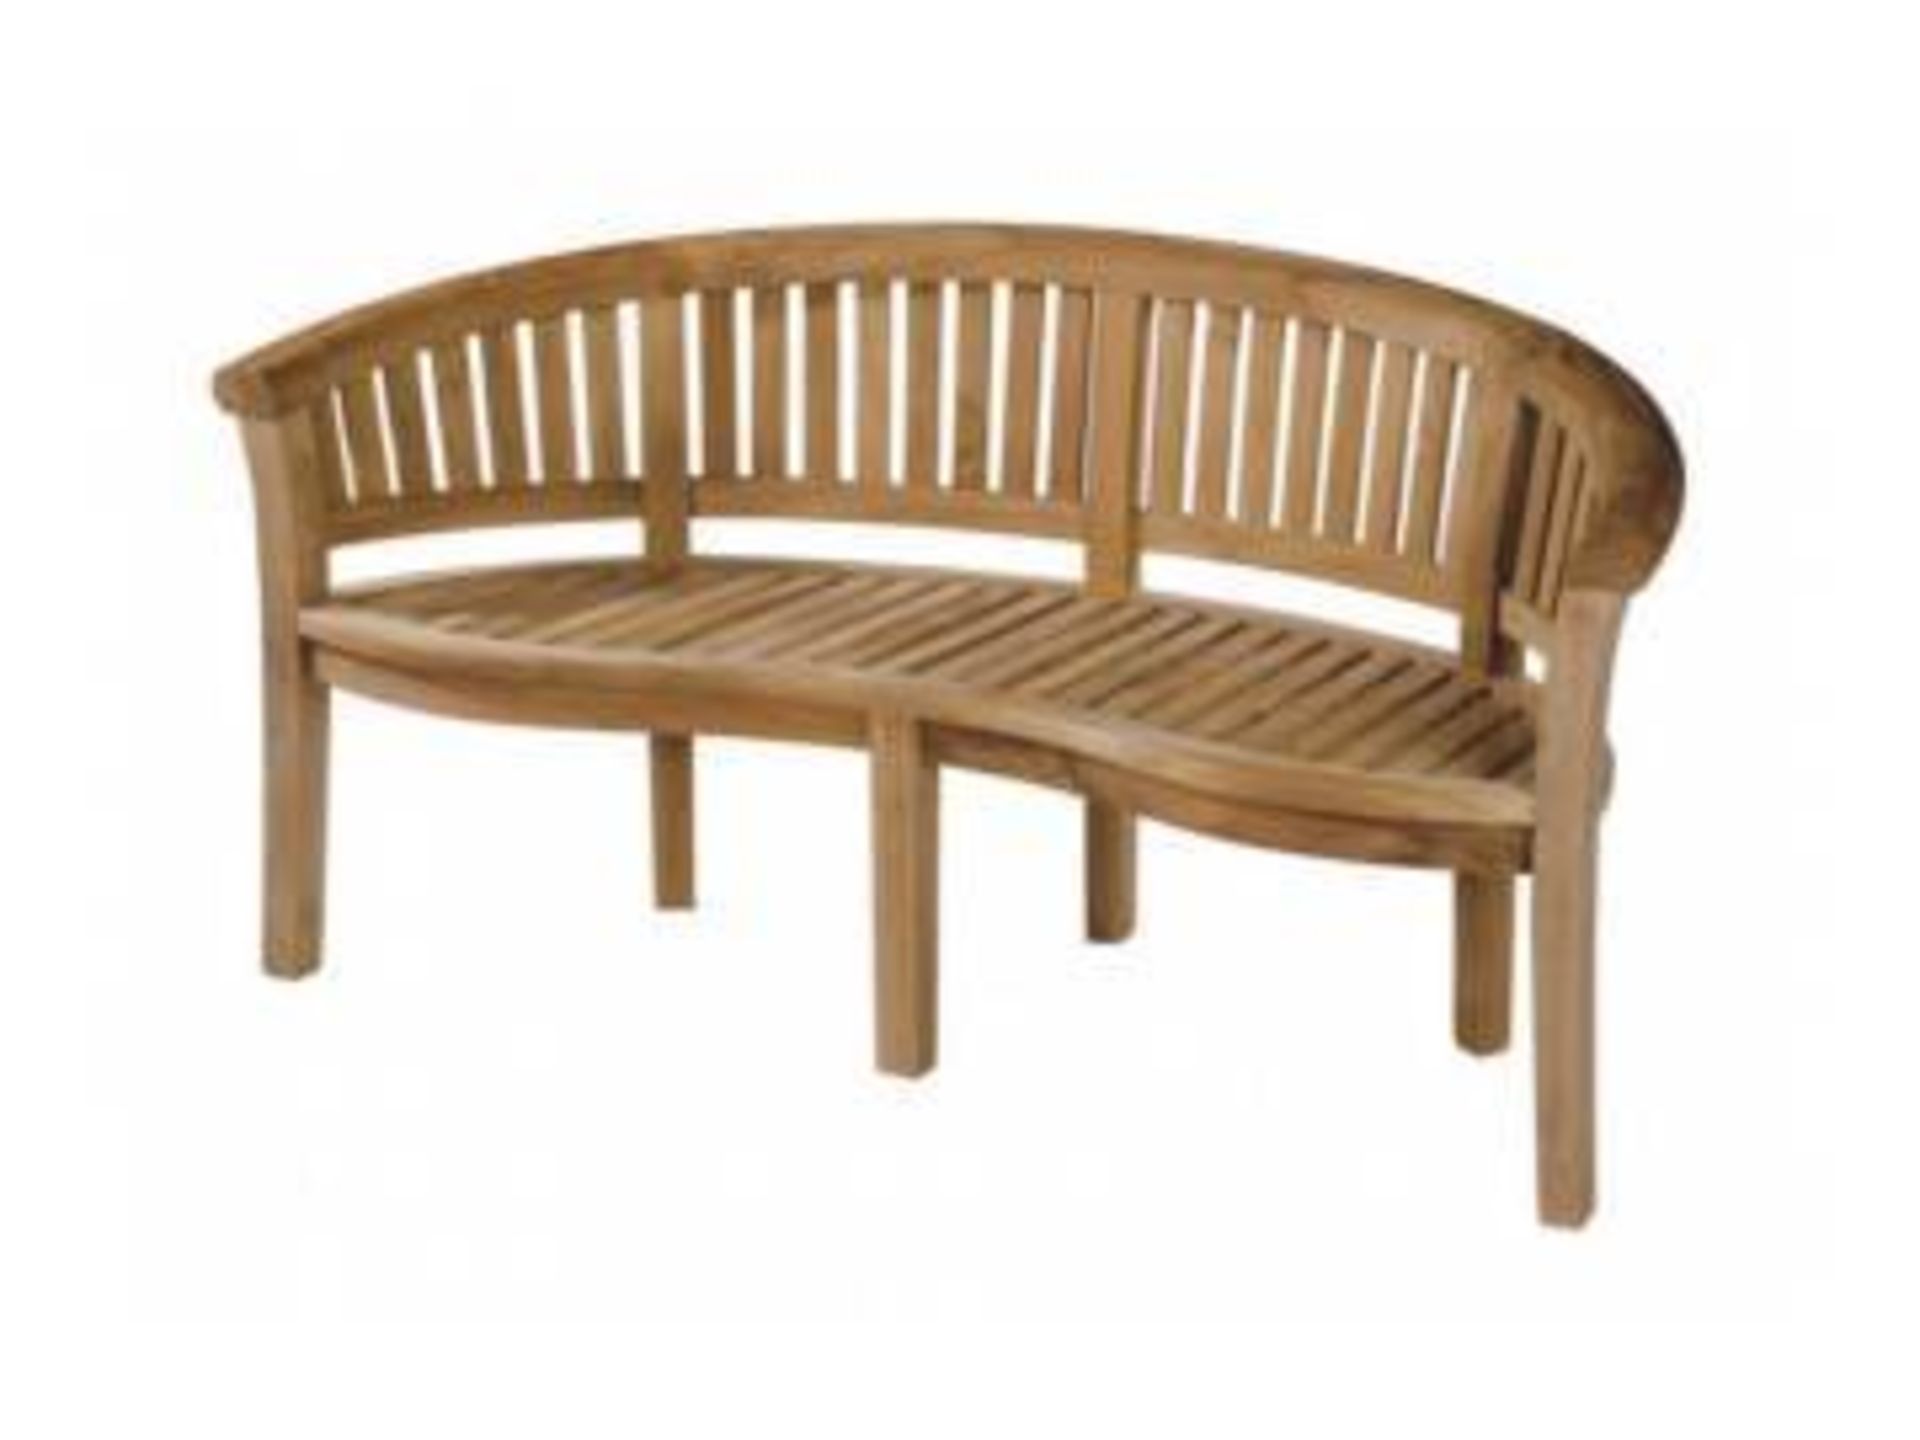 BRAND NEW BOXED SOLID TEAK PEANUT BENCH